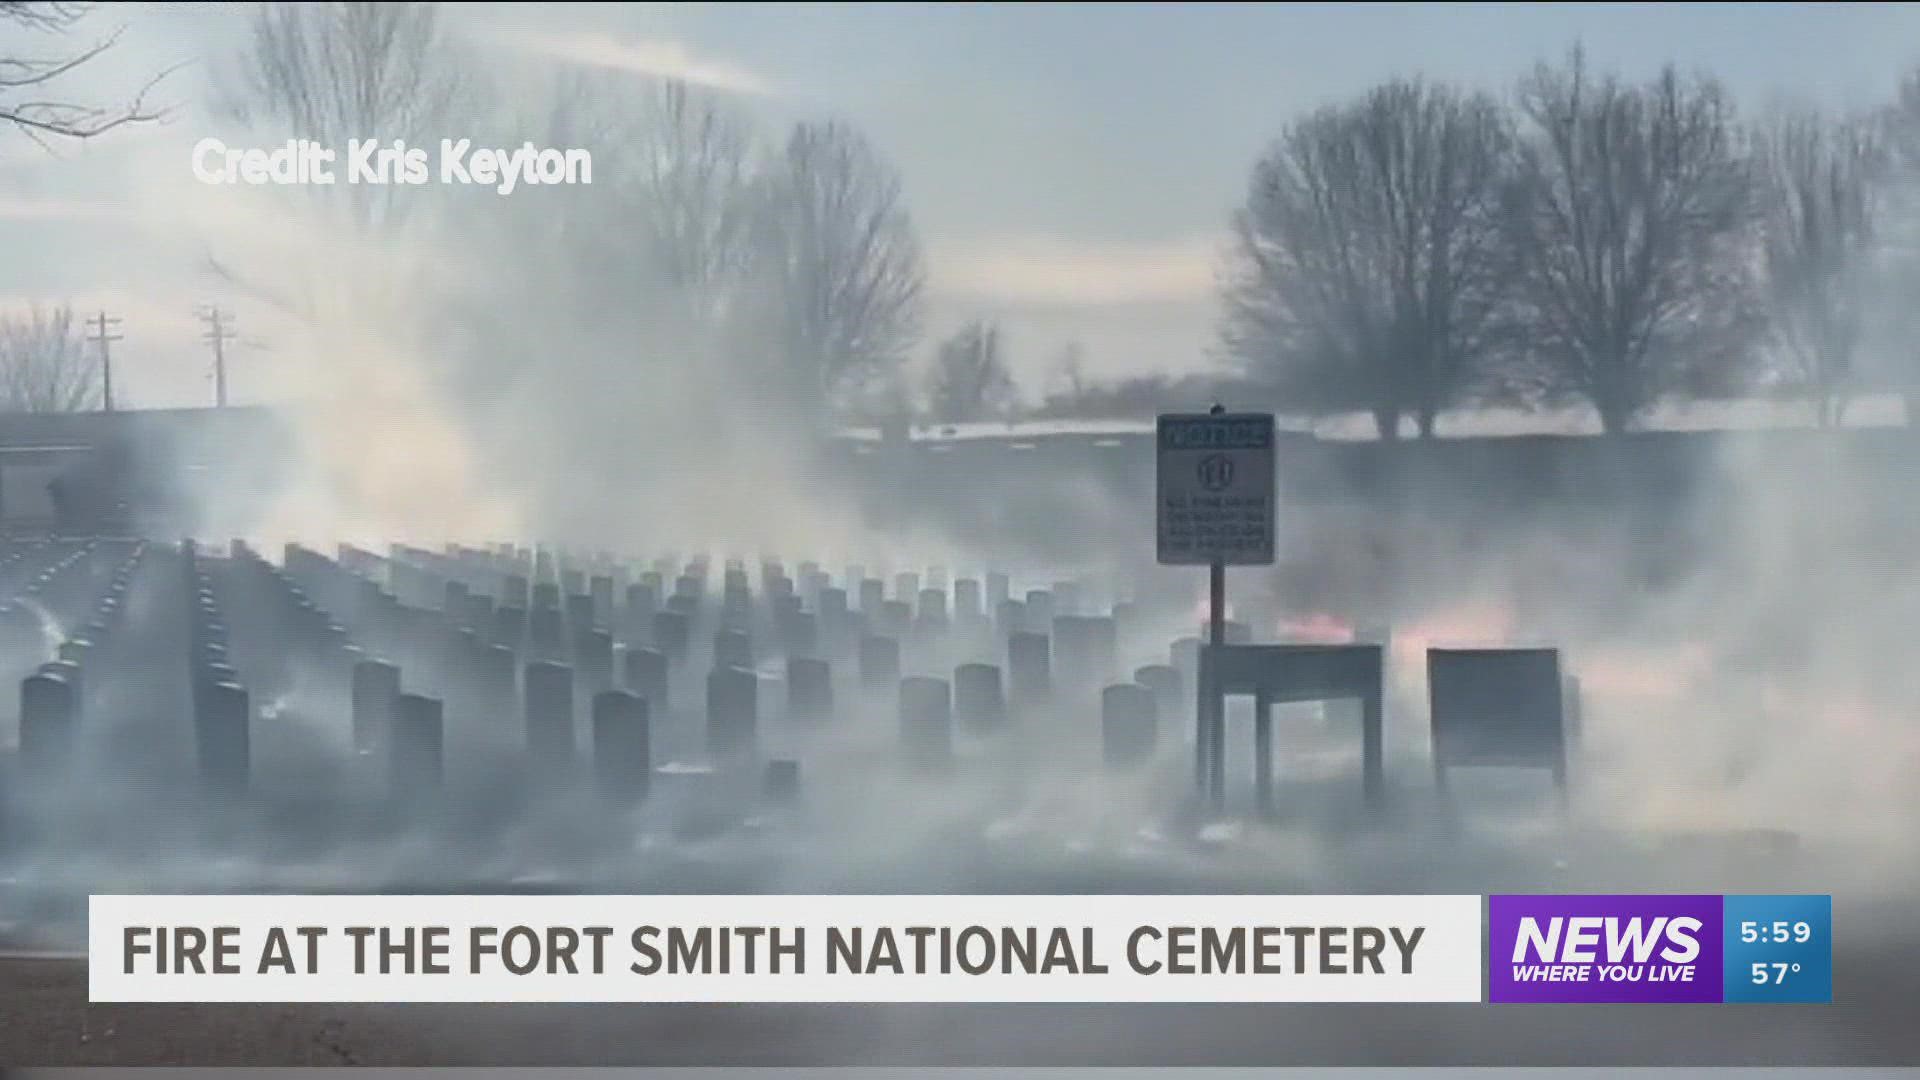 Rows of headstones have been damaged after a grass fire swept through the Fort Smith National Cemetery.